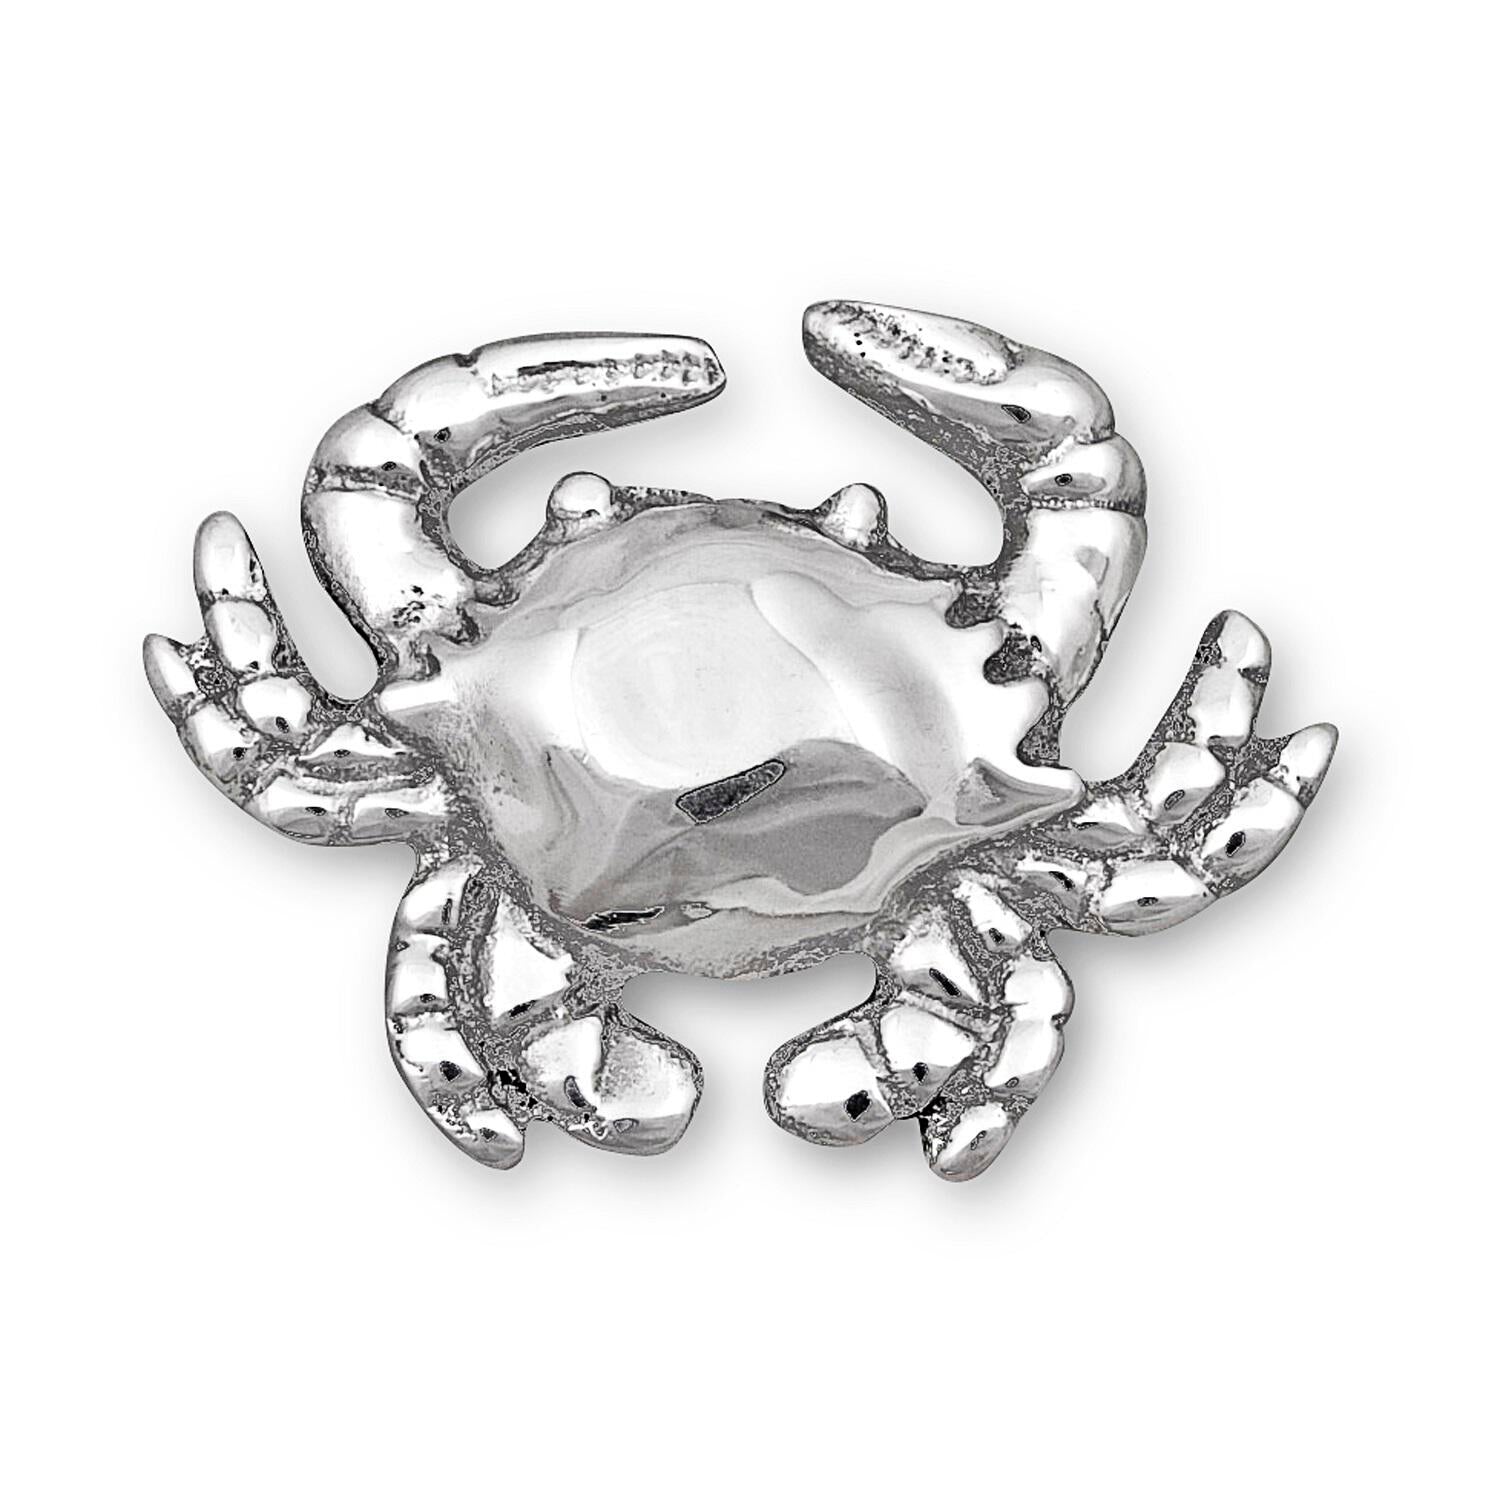 GIFTABLES Ocean Crab Weight